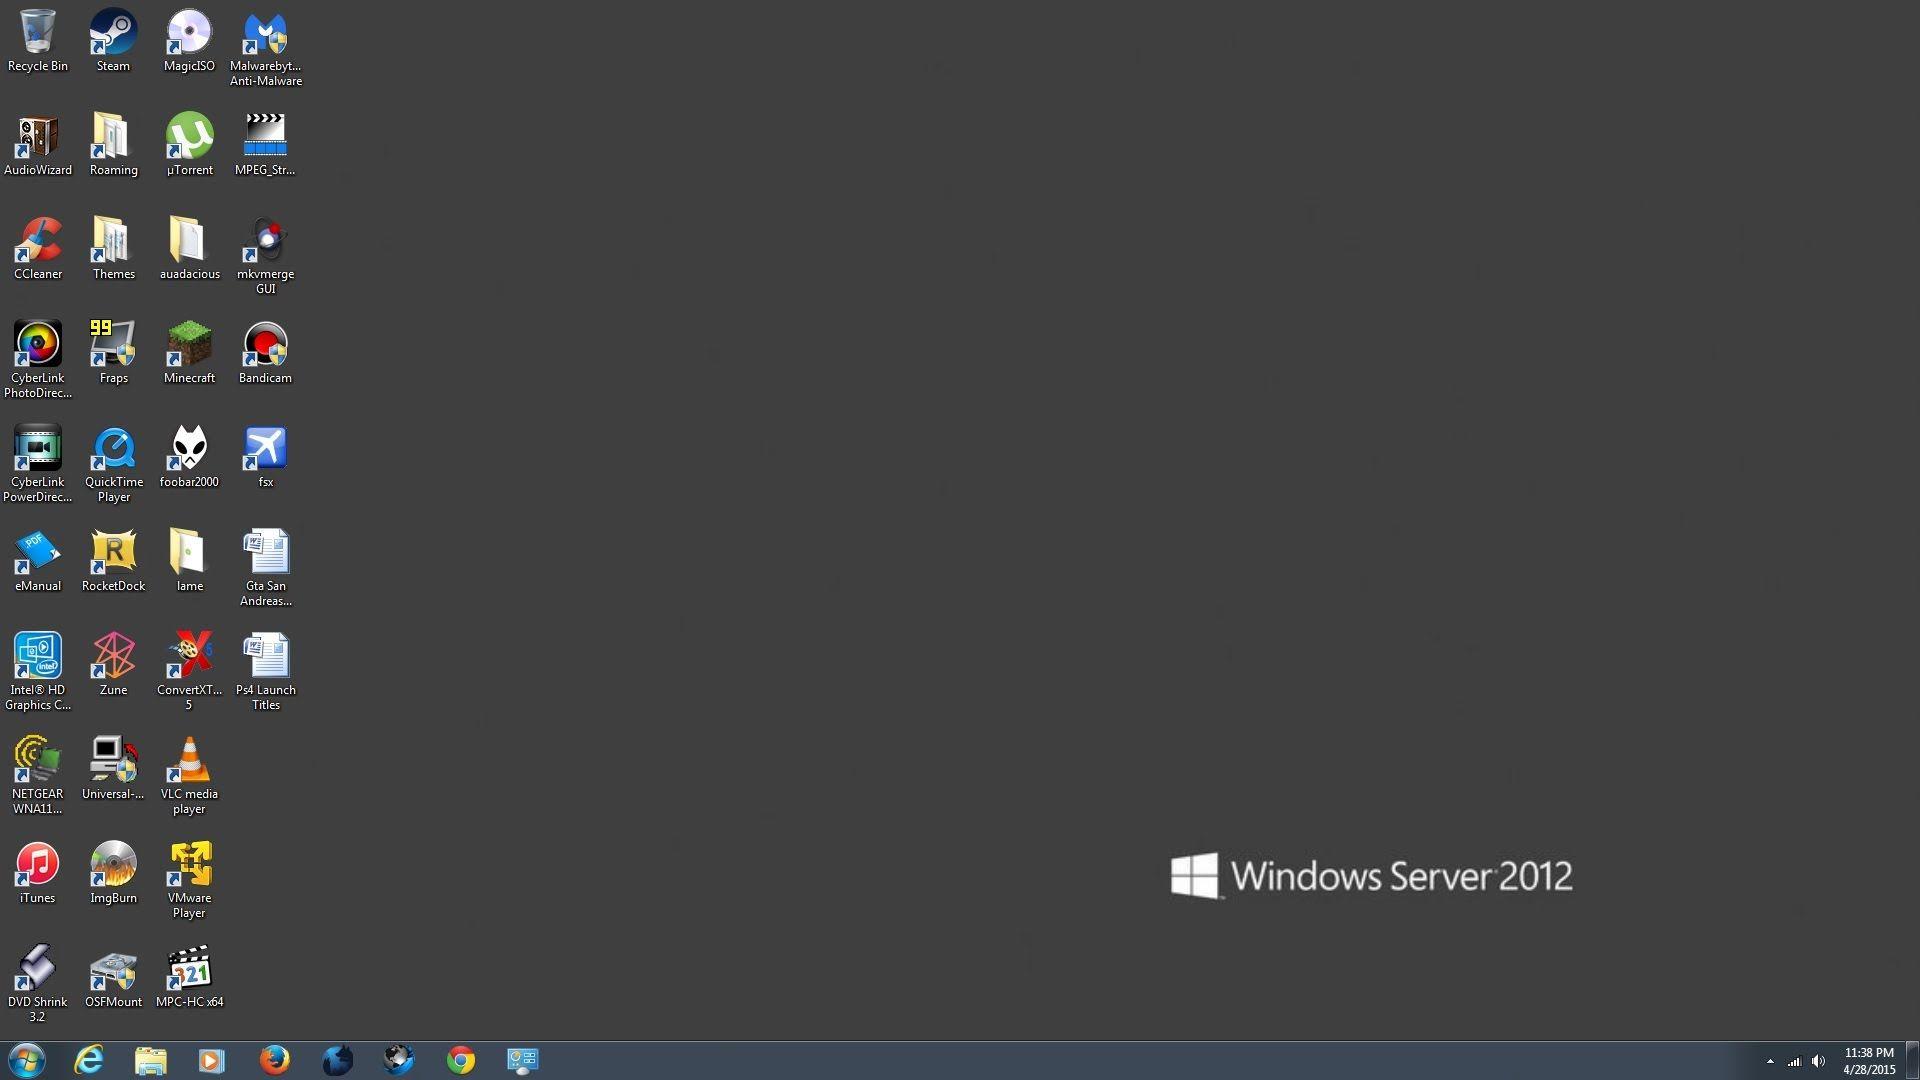 Windows 7 with Server 2012 wallpaper